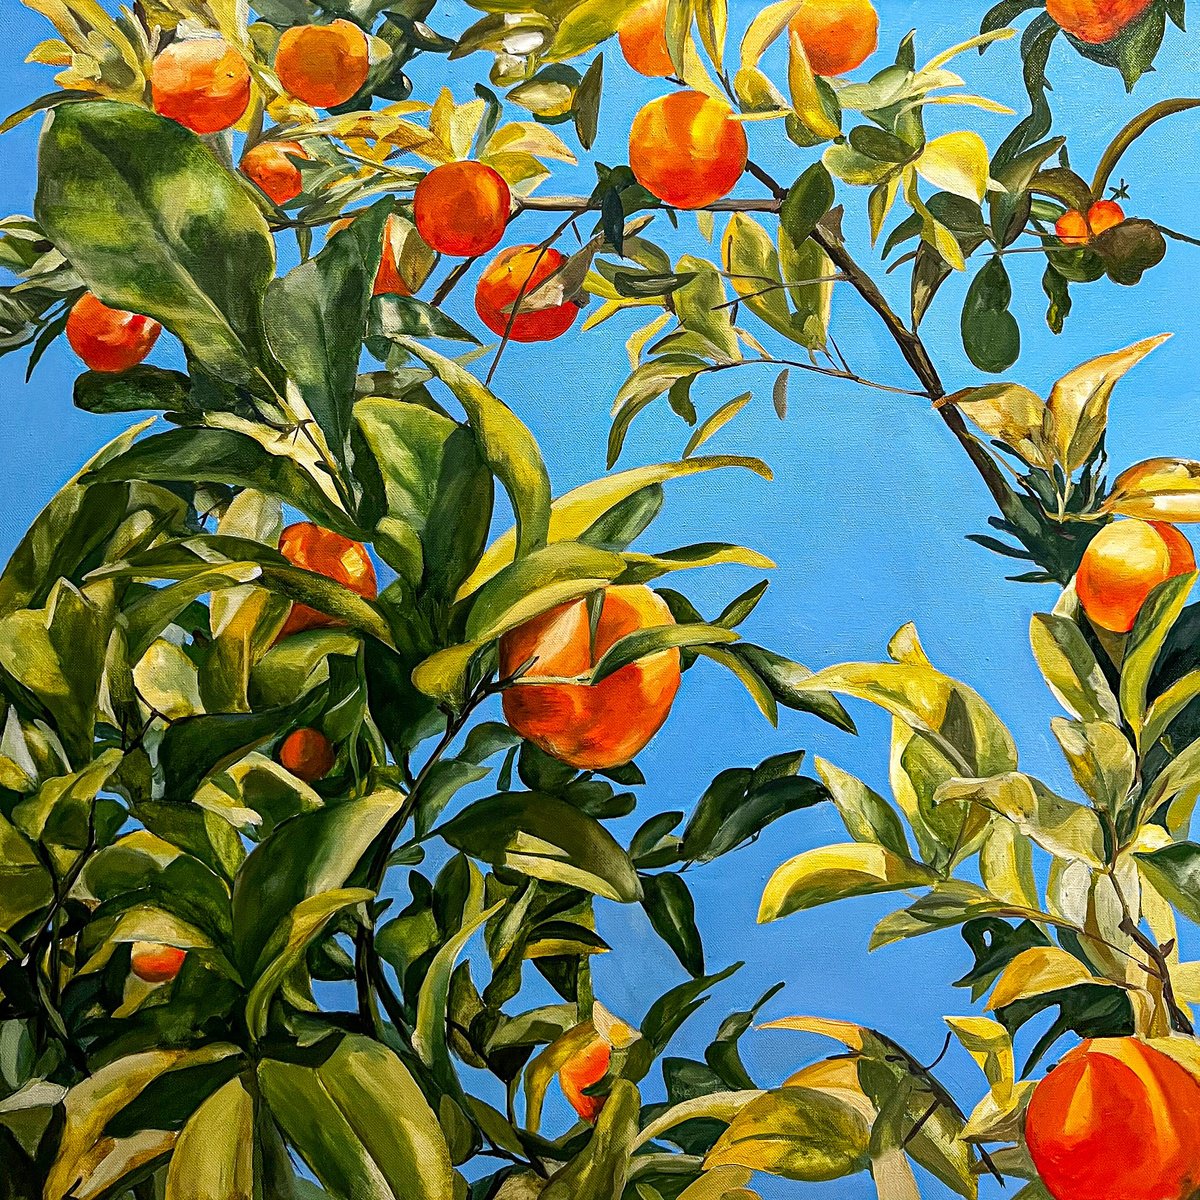 Tangerine tree by VICTO